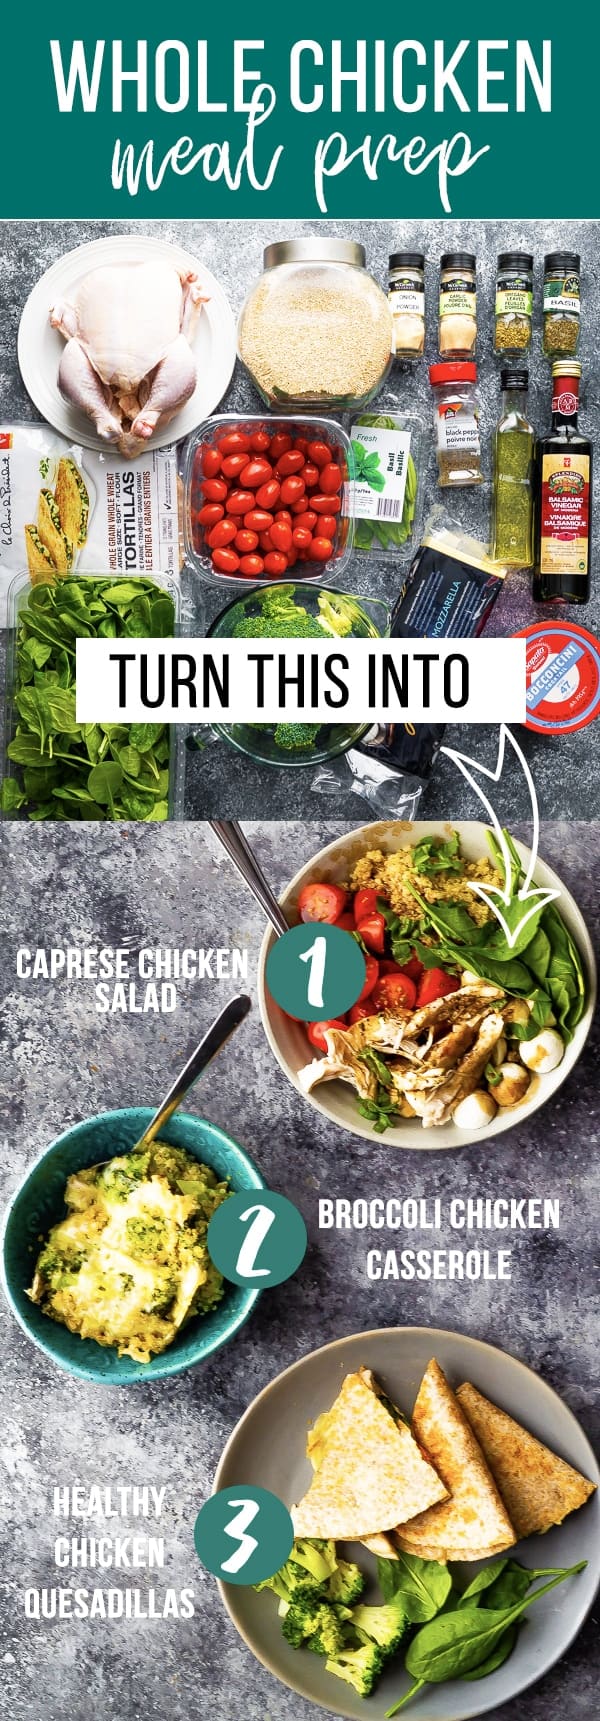 overhead shot of a collage image of ingredients and caprese chicken salad